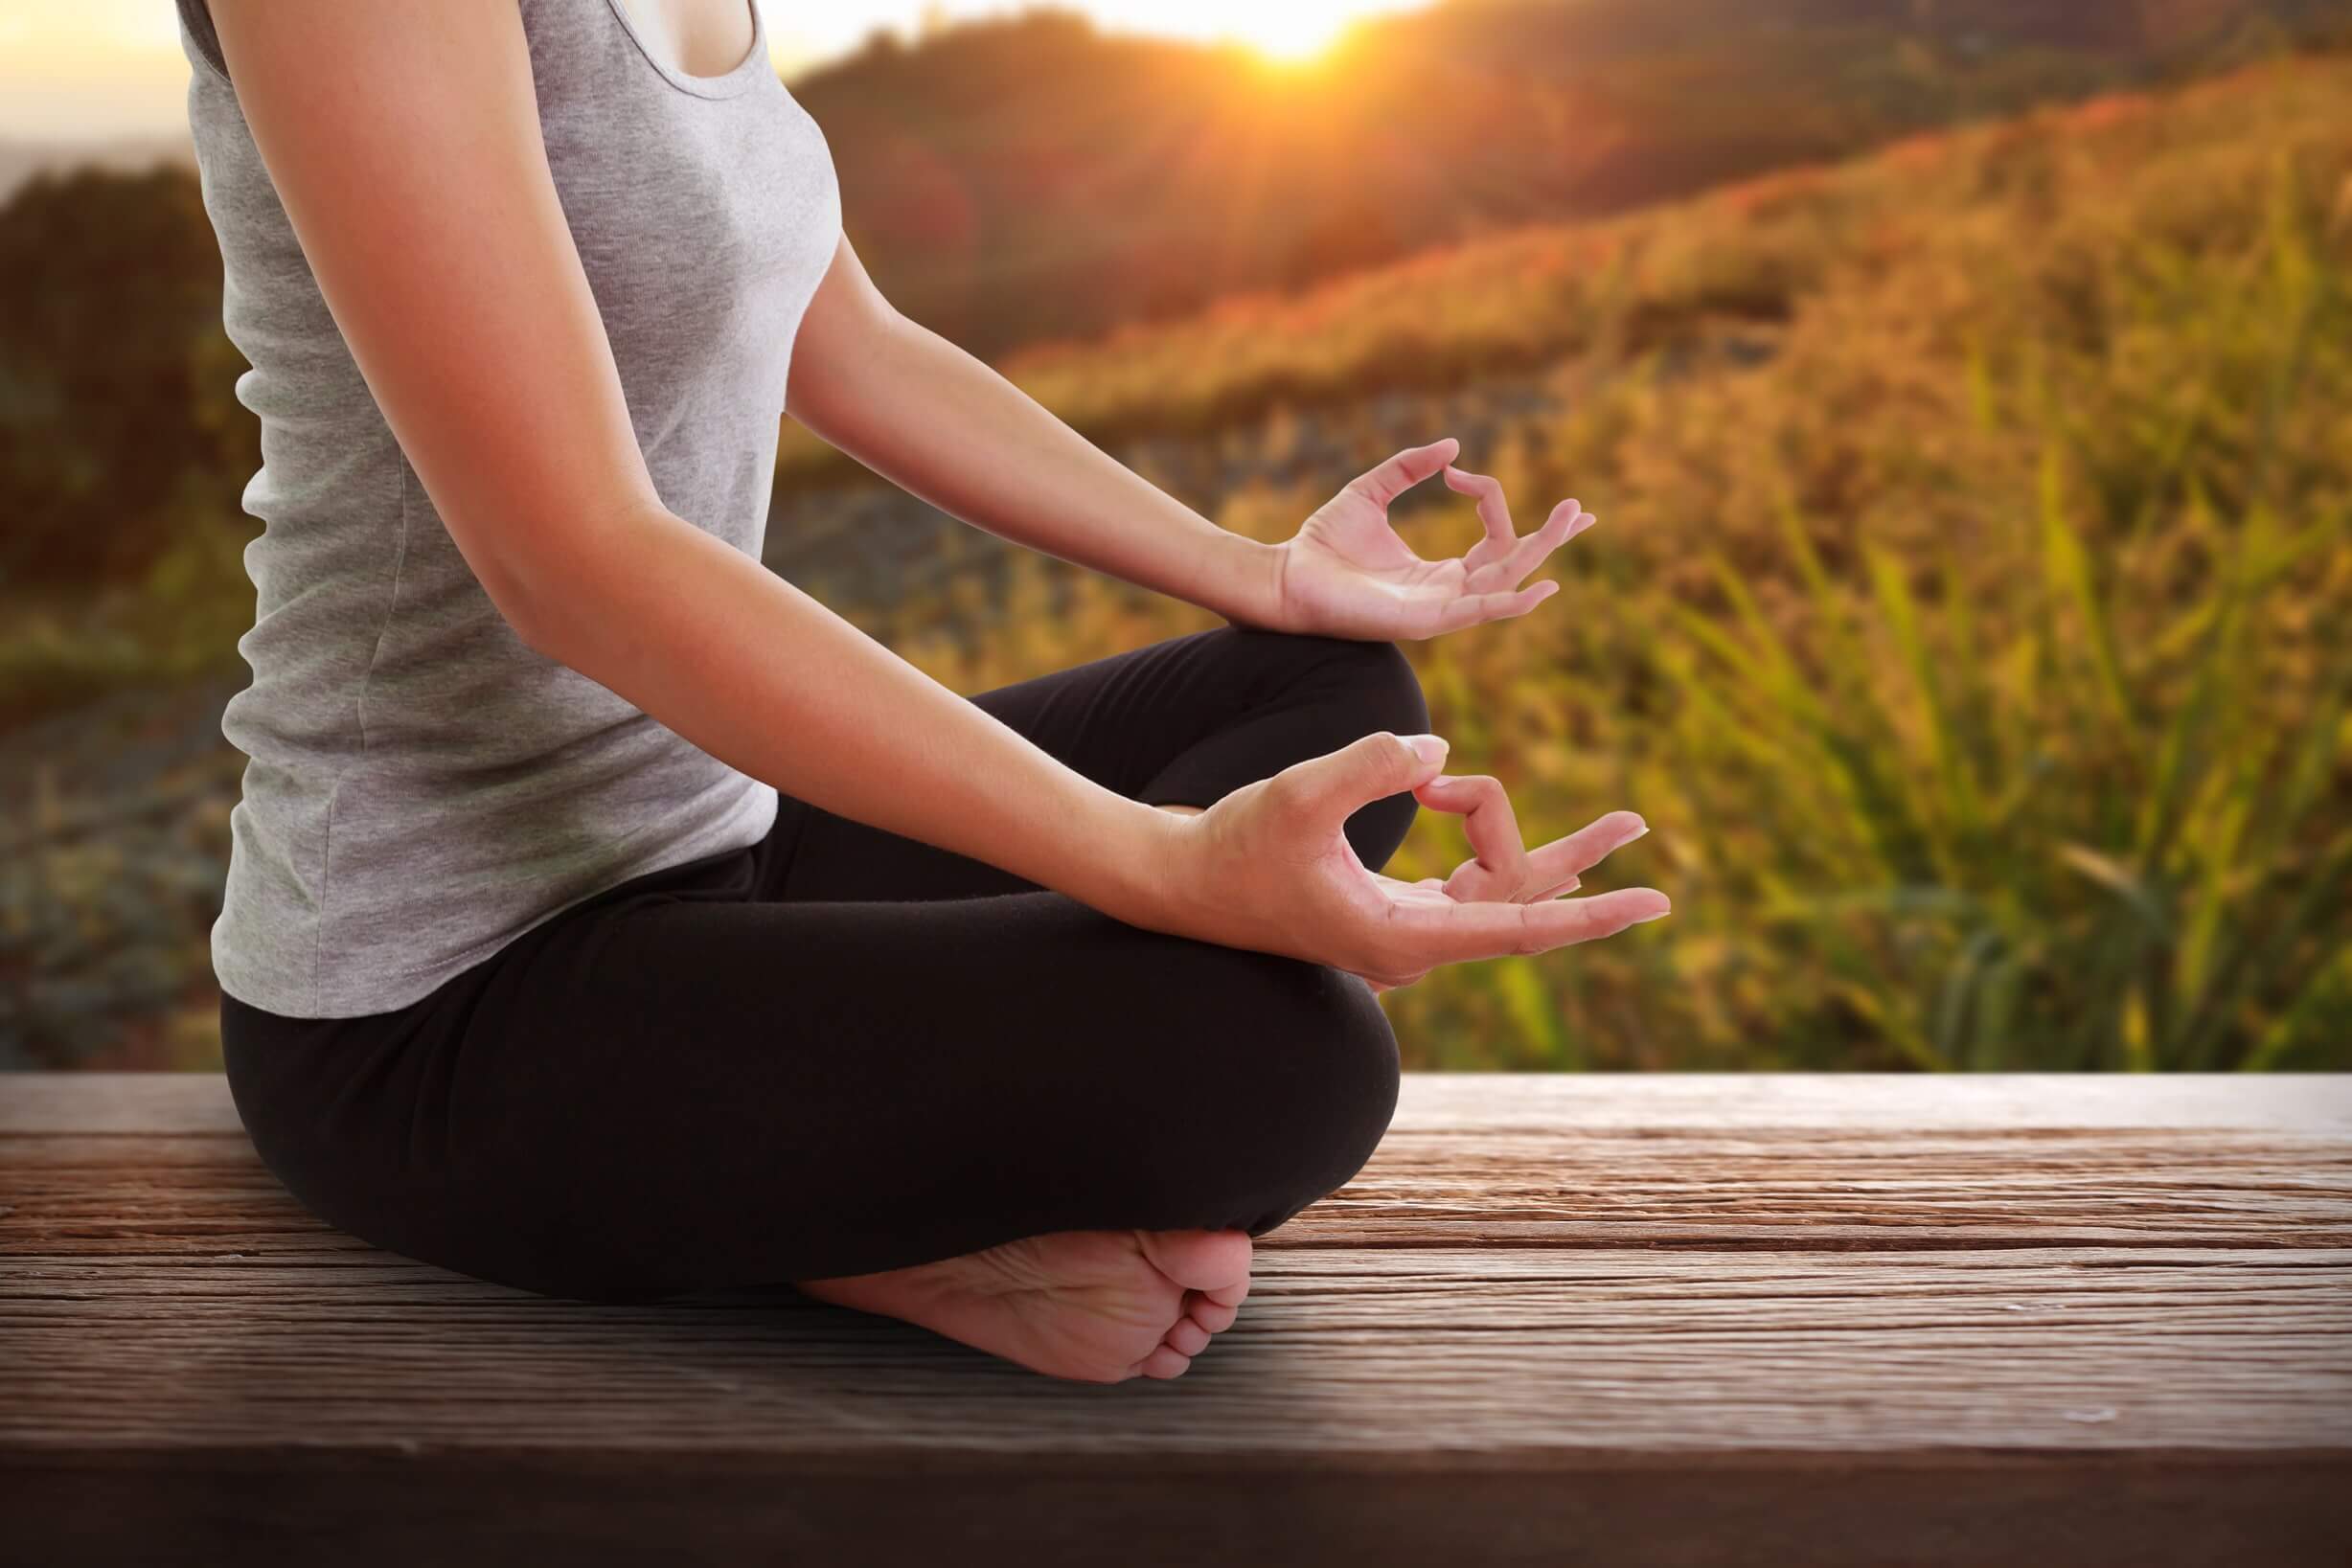 Woman practices mental wellness by meditating.